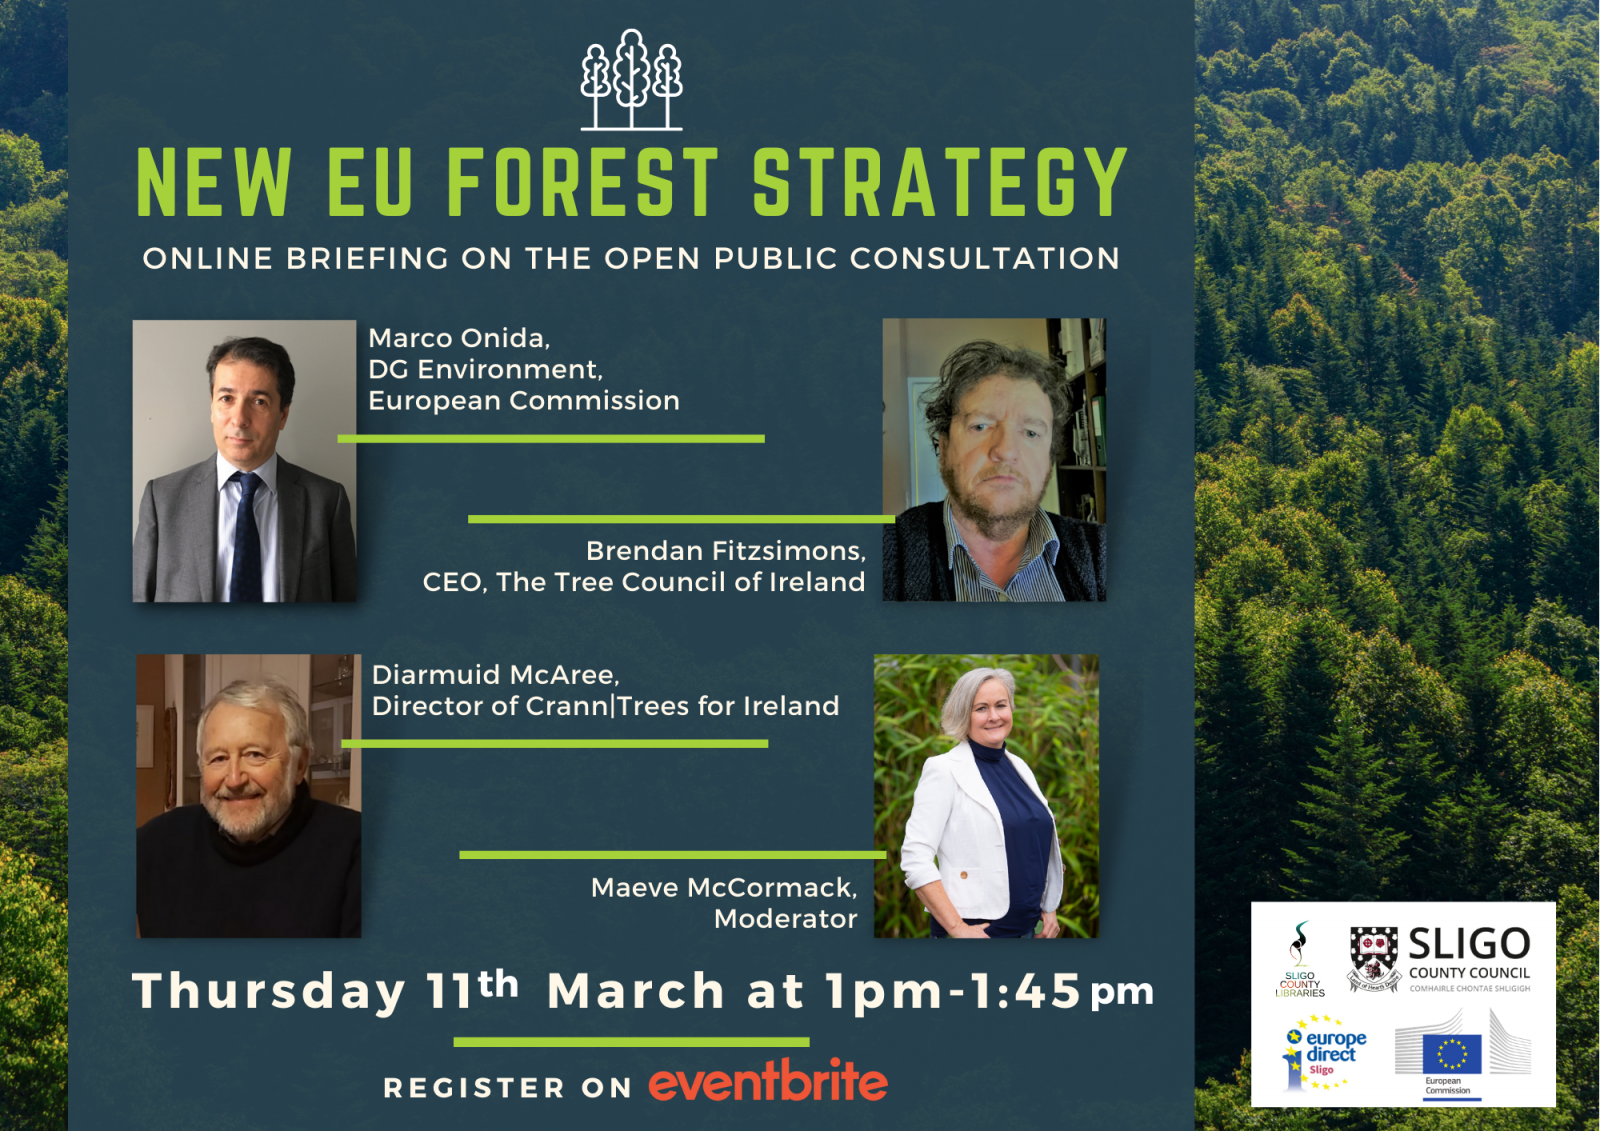 Poster for EDIC Sligo free online webinar on the public consultation for the new EU Forest Strategy March 11th at 1pm register at eventbrite:  https://bit.ly/3kIclI0 